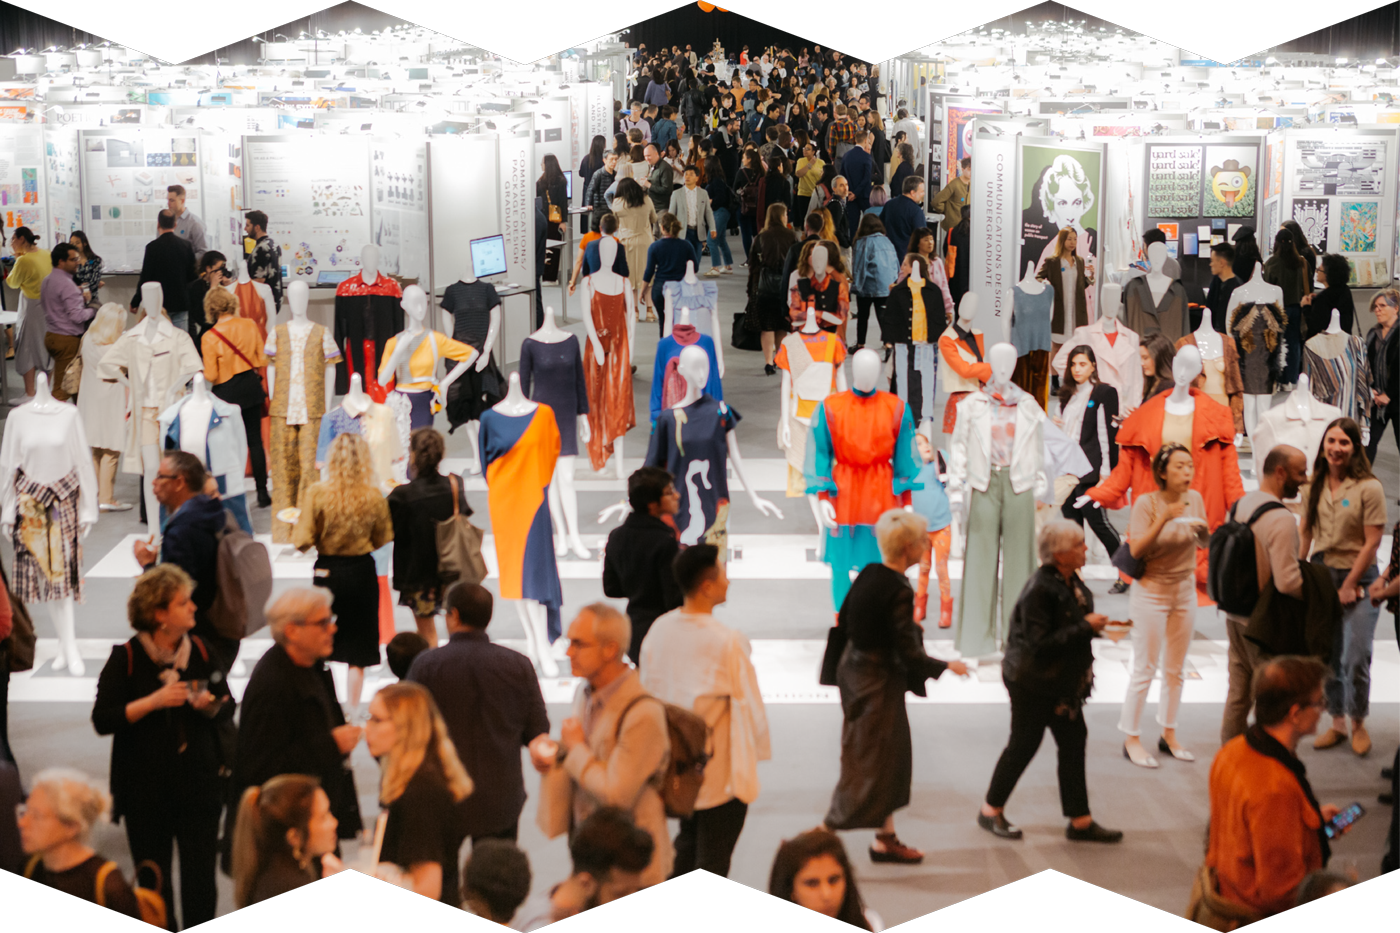 A photograph showing a large group exhibition of design pieces: fashion, communications design, and more. The space is full of people viewing and admiring the work.